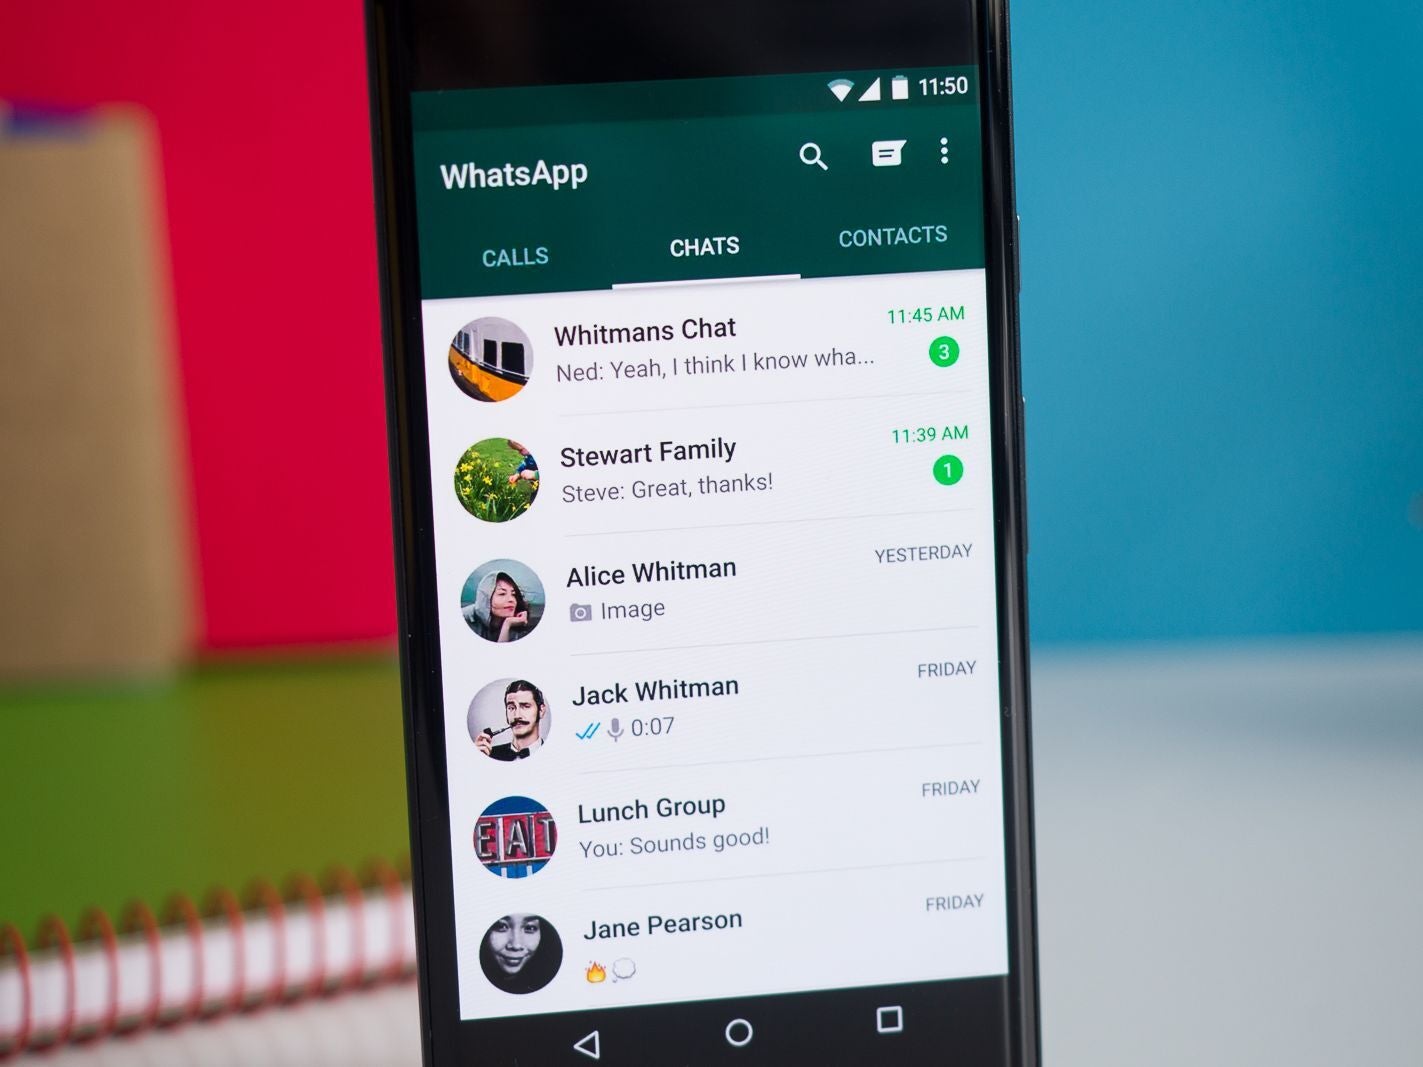 Regardless, WhatsApp remains one of the most used IM apps worldwide.  - WhatsApp users can now opt out of Terms and Conditions, but this may cost app features